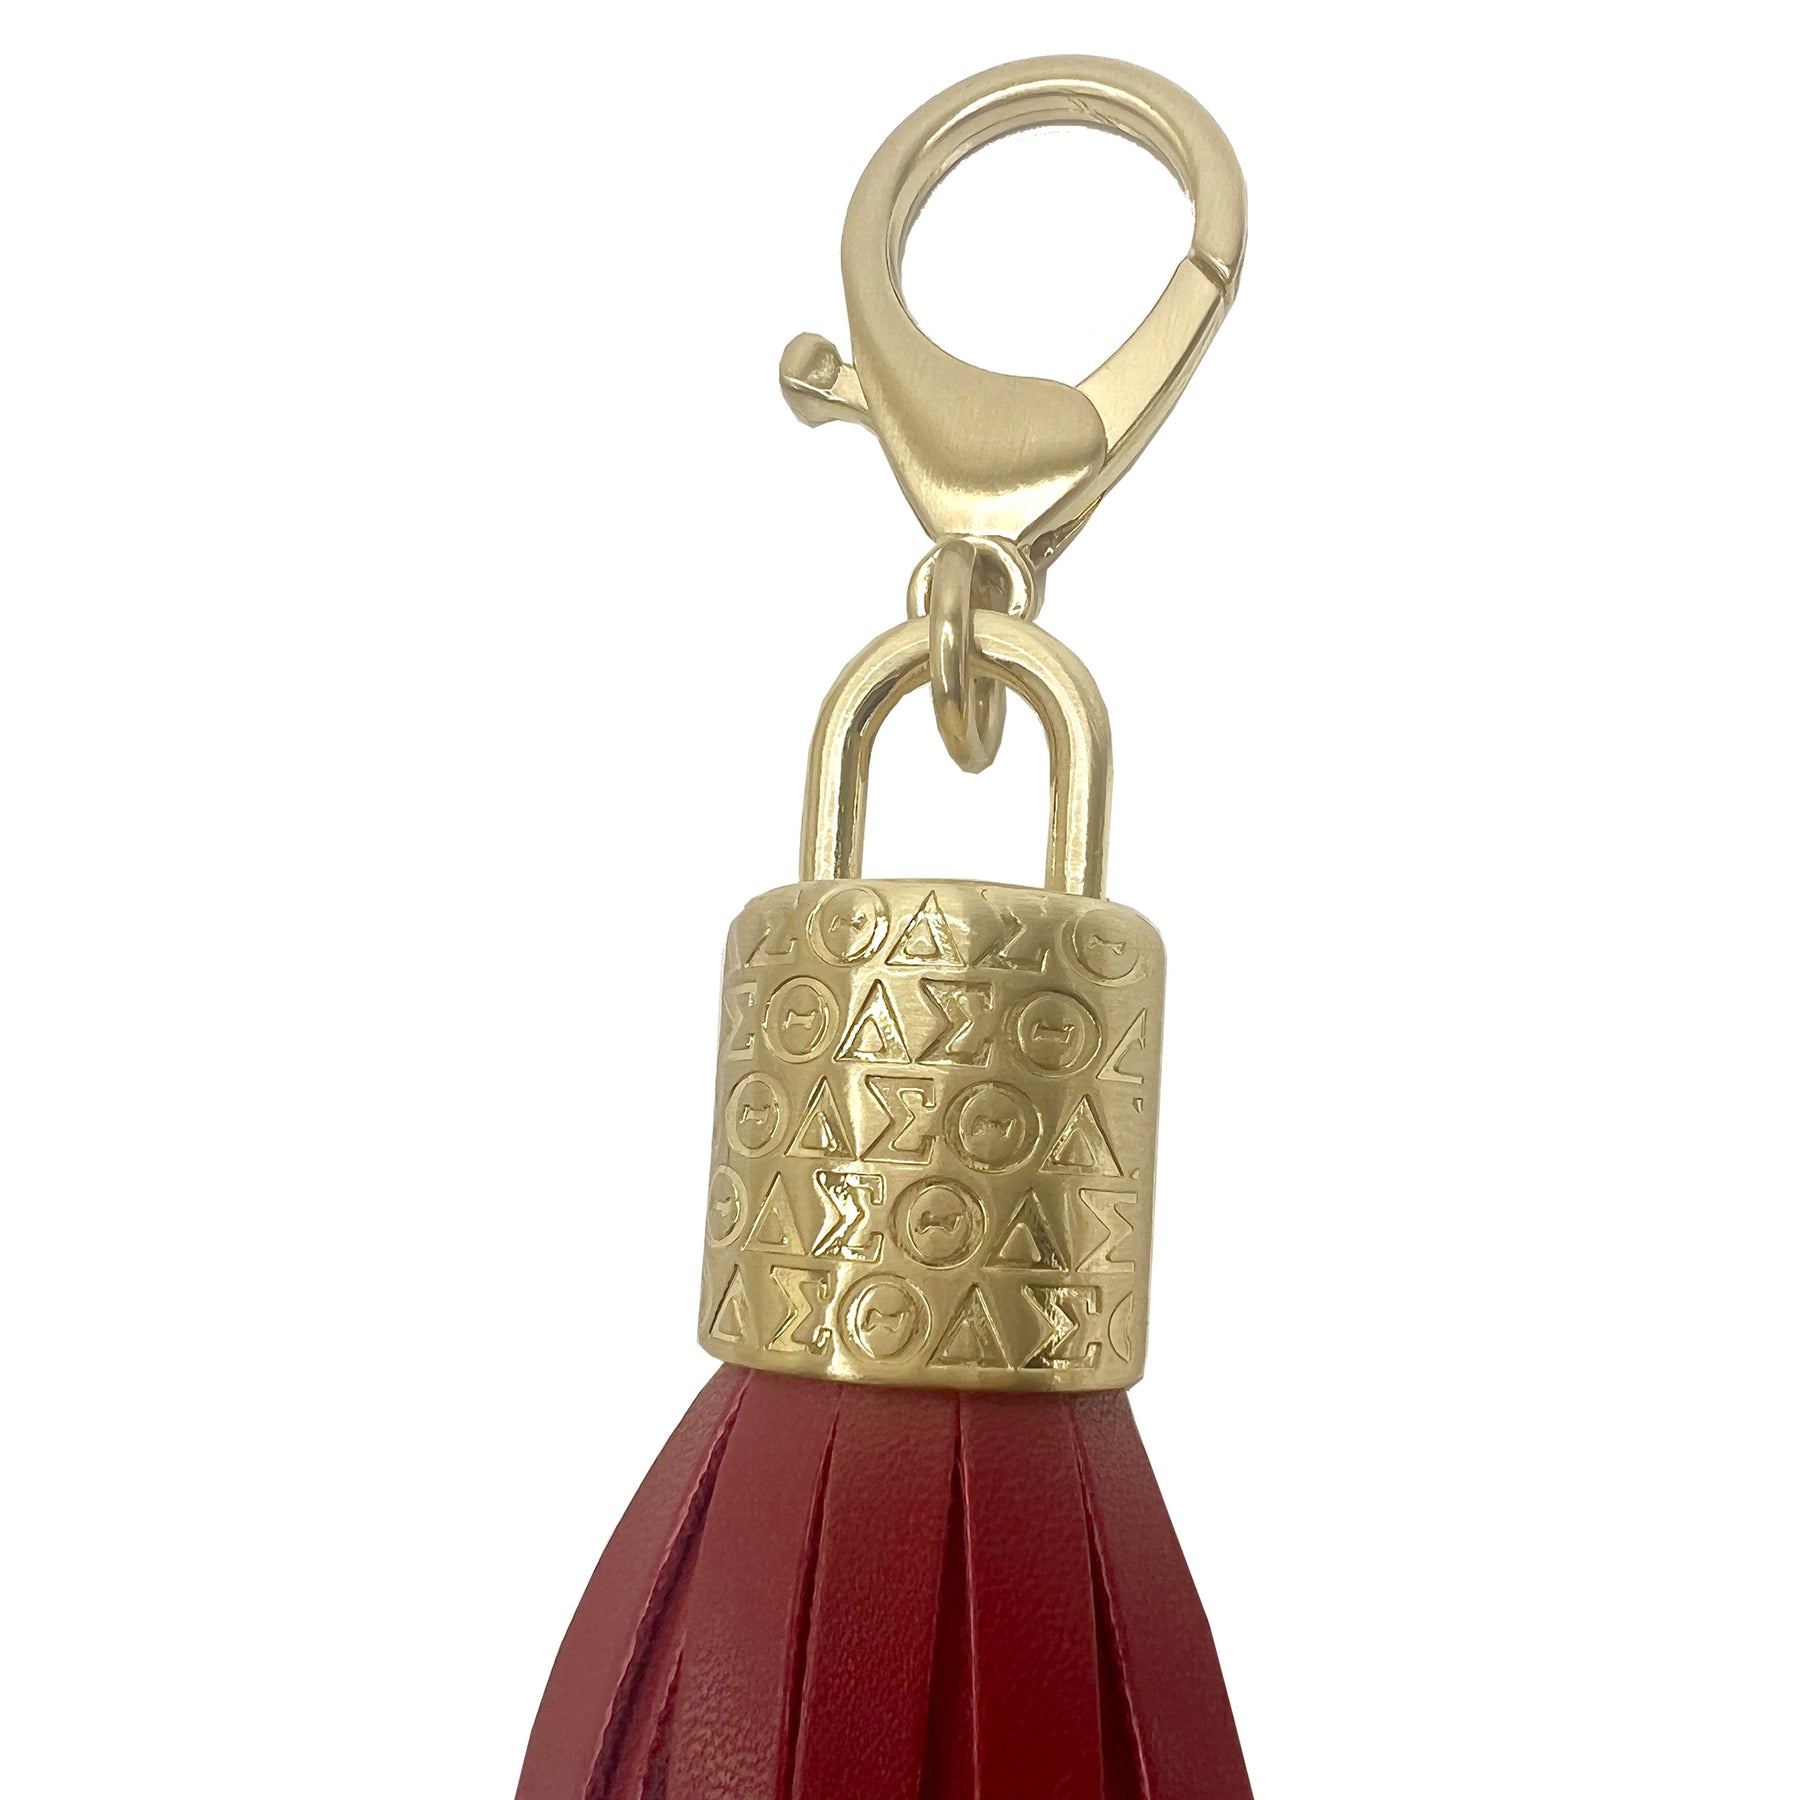 2 for Special Delta Sigma Theta DST Red Faux Leather Tassel Charm